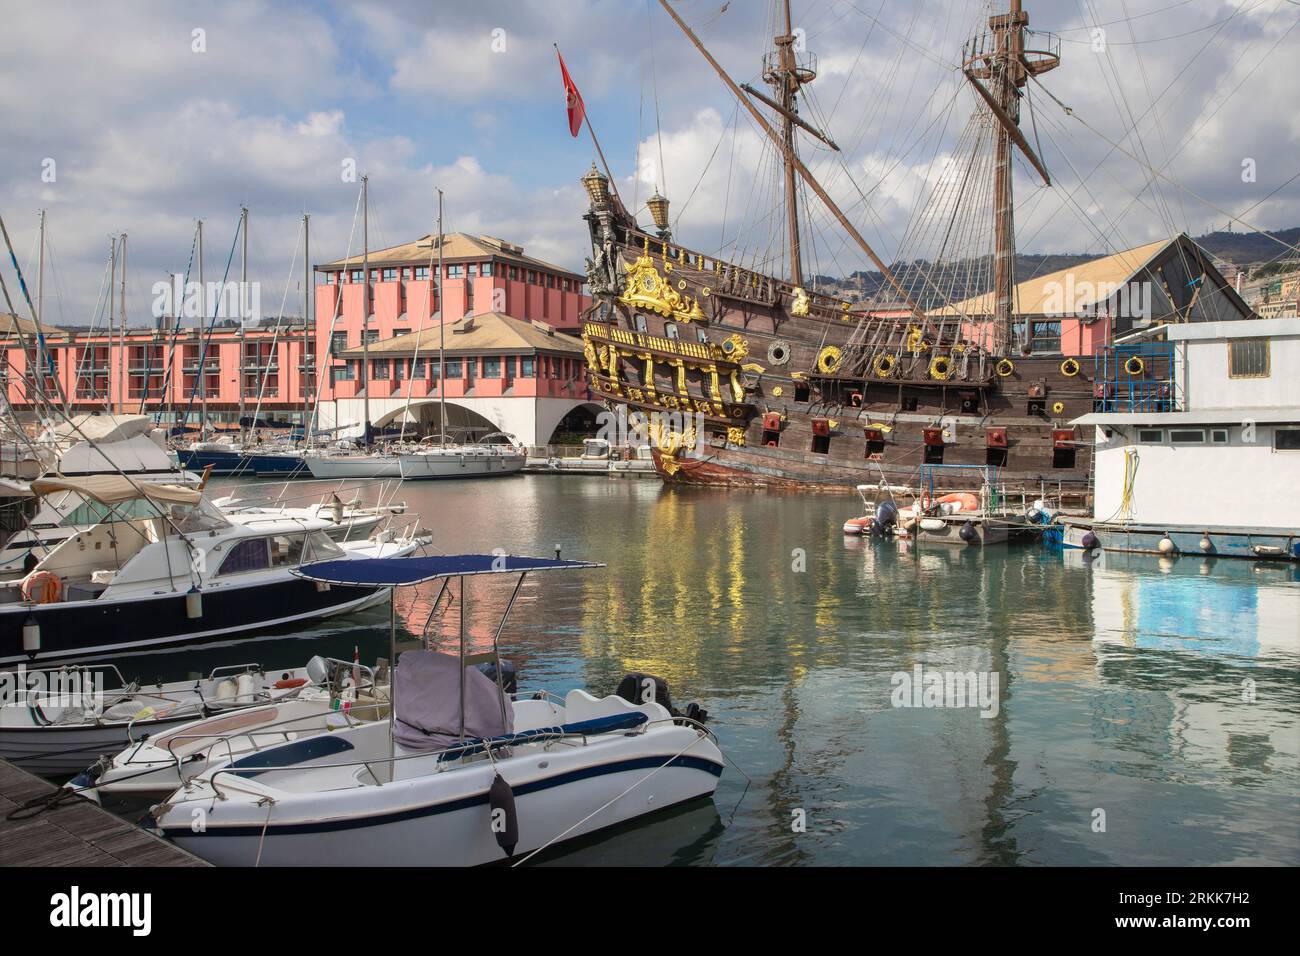 Genova - The Neptune galleon - ship replica of a 17th-century Spanish galleon designed by Naval Architect David Cannell. The ship was built in 1985 Stock Photo